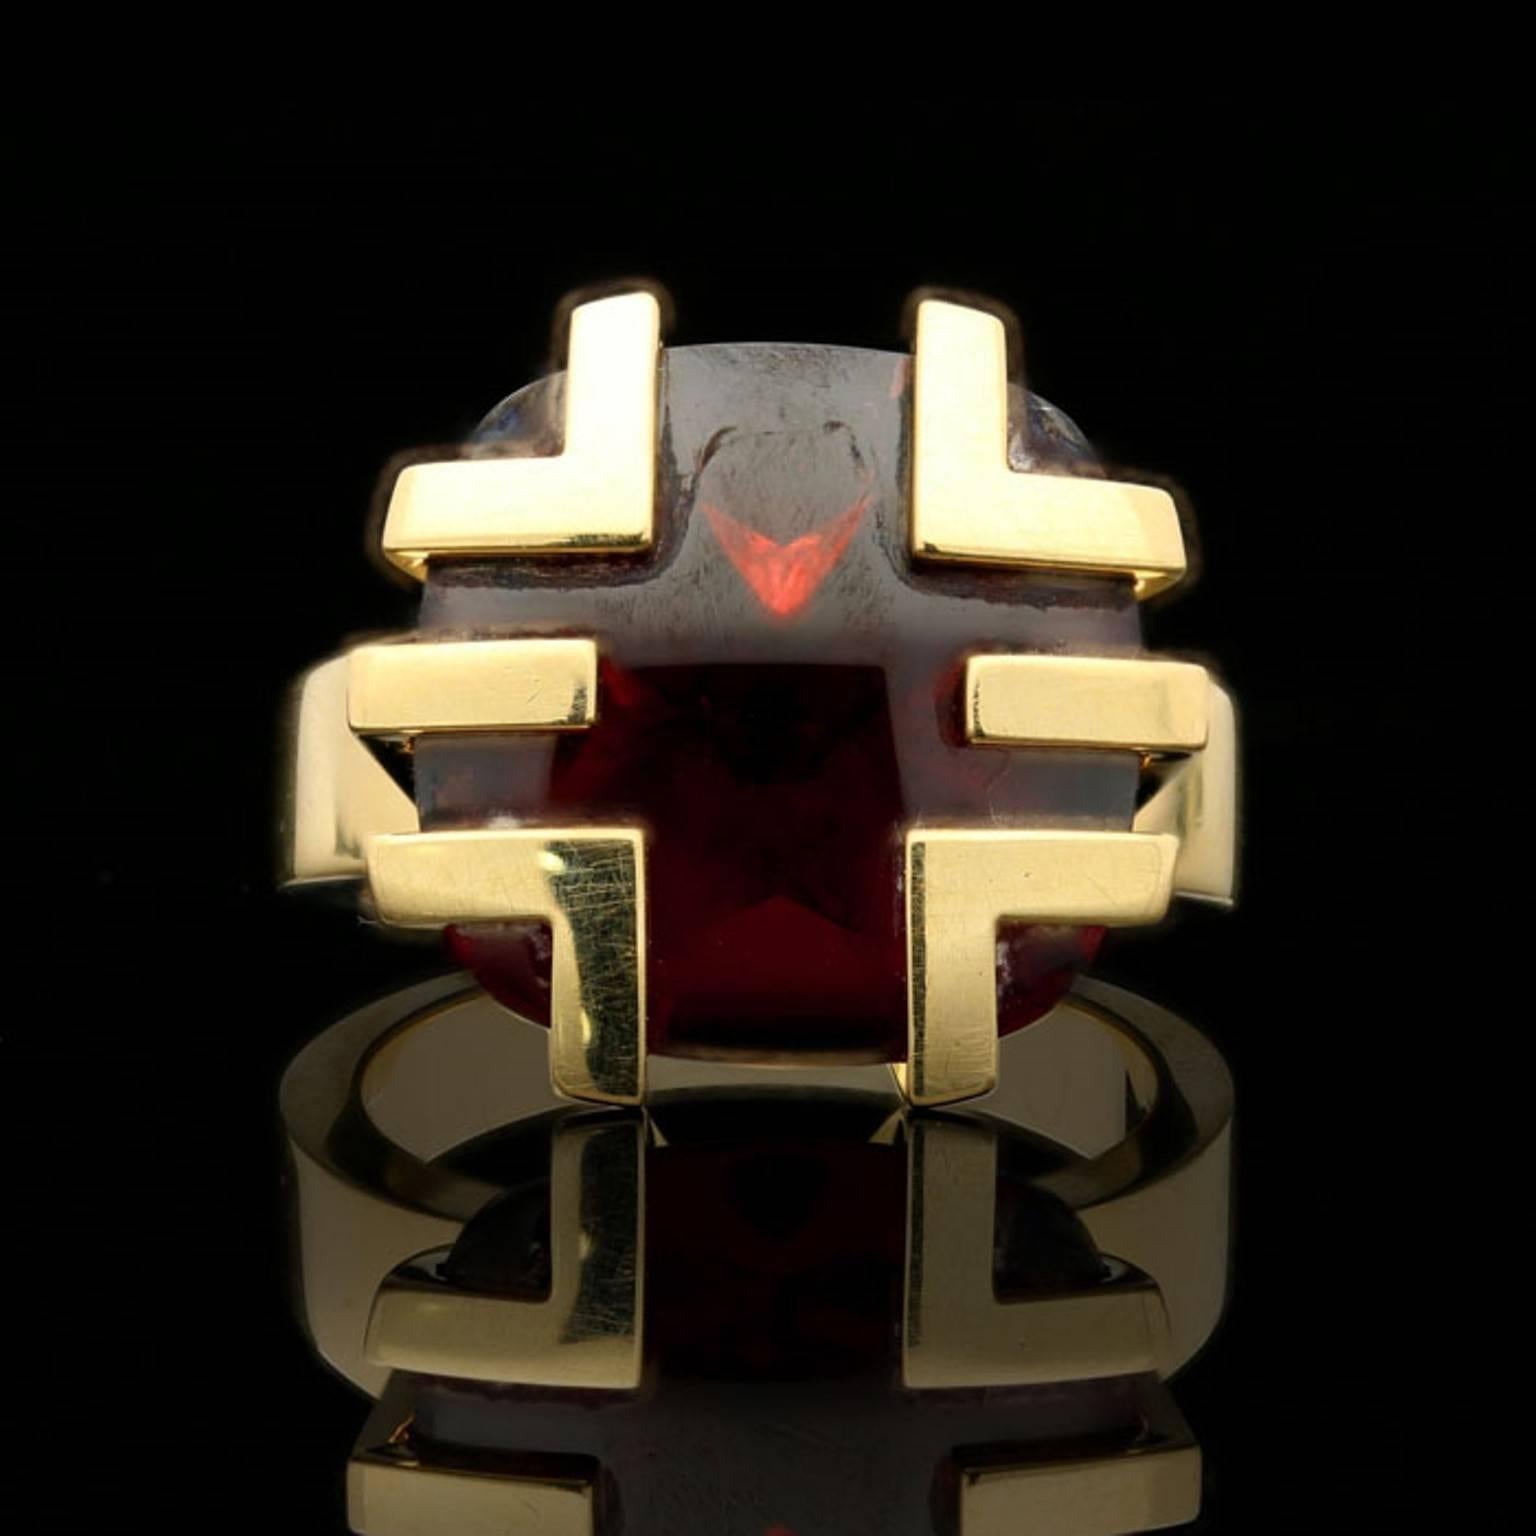 A stylish 18 carat yellow gold and garnet ring by Cartier, c. 2003, from the 'Le Baiser du Dragon' (Kiss of the Dragon) collection, designed as a cushion shaped buff top garnet set to the corners and sides with angular geometric gold motifs to a